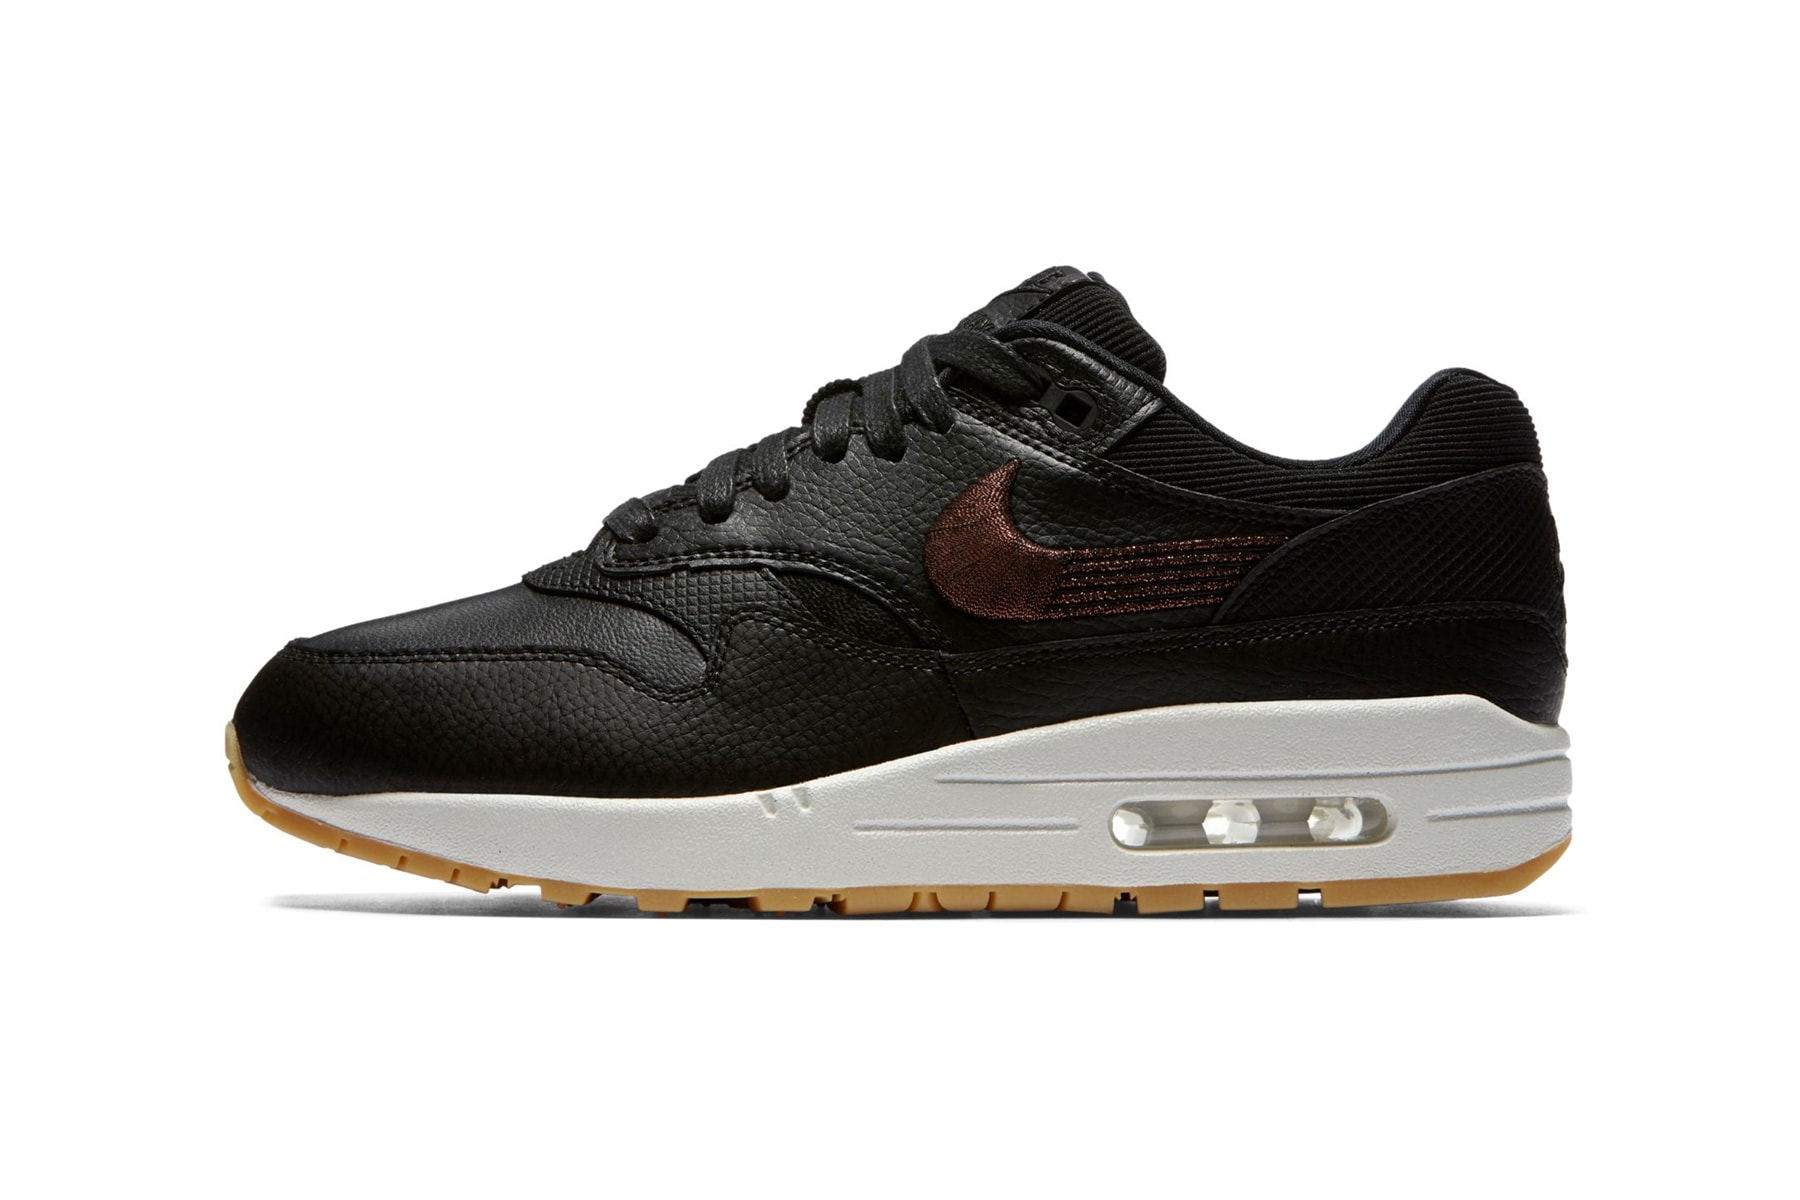 Nike Air Max 1 Premium Black Leather Bronze embroidery release date price sneaker